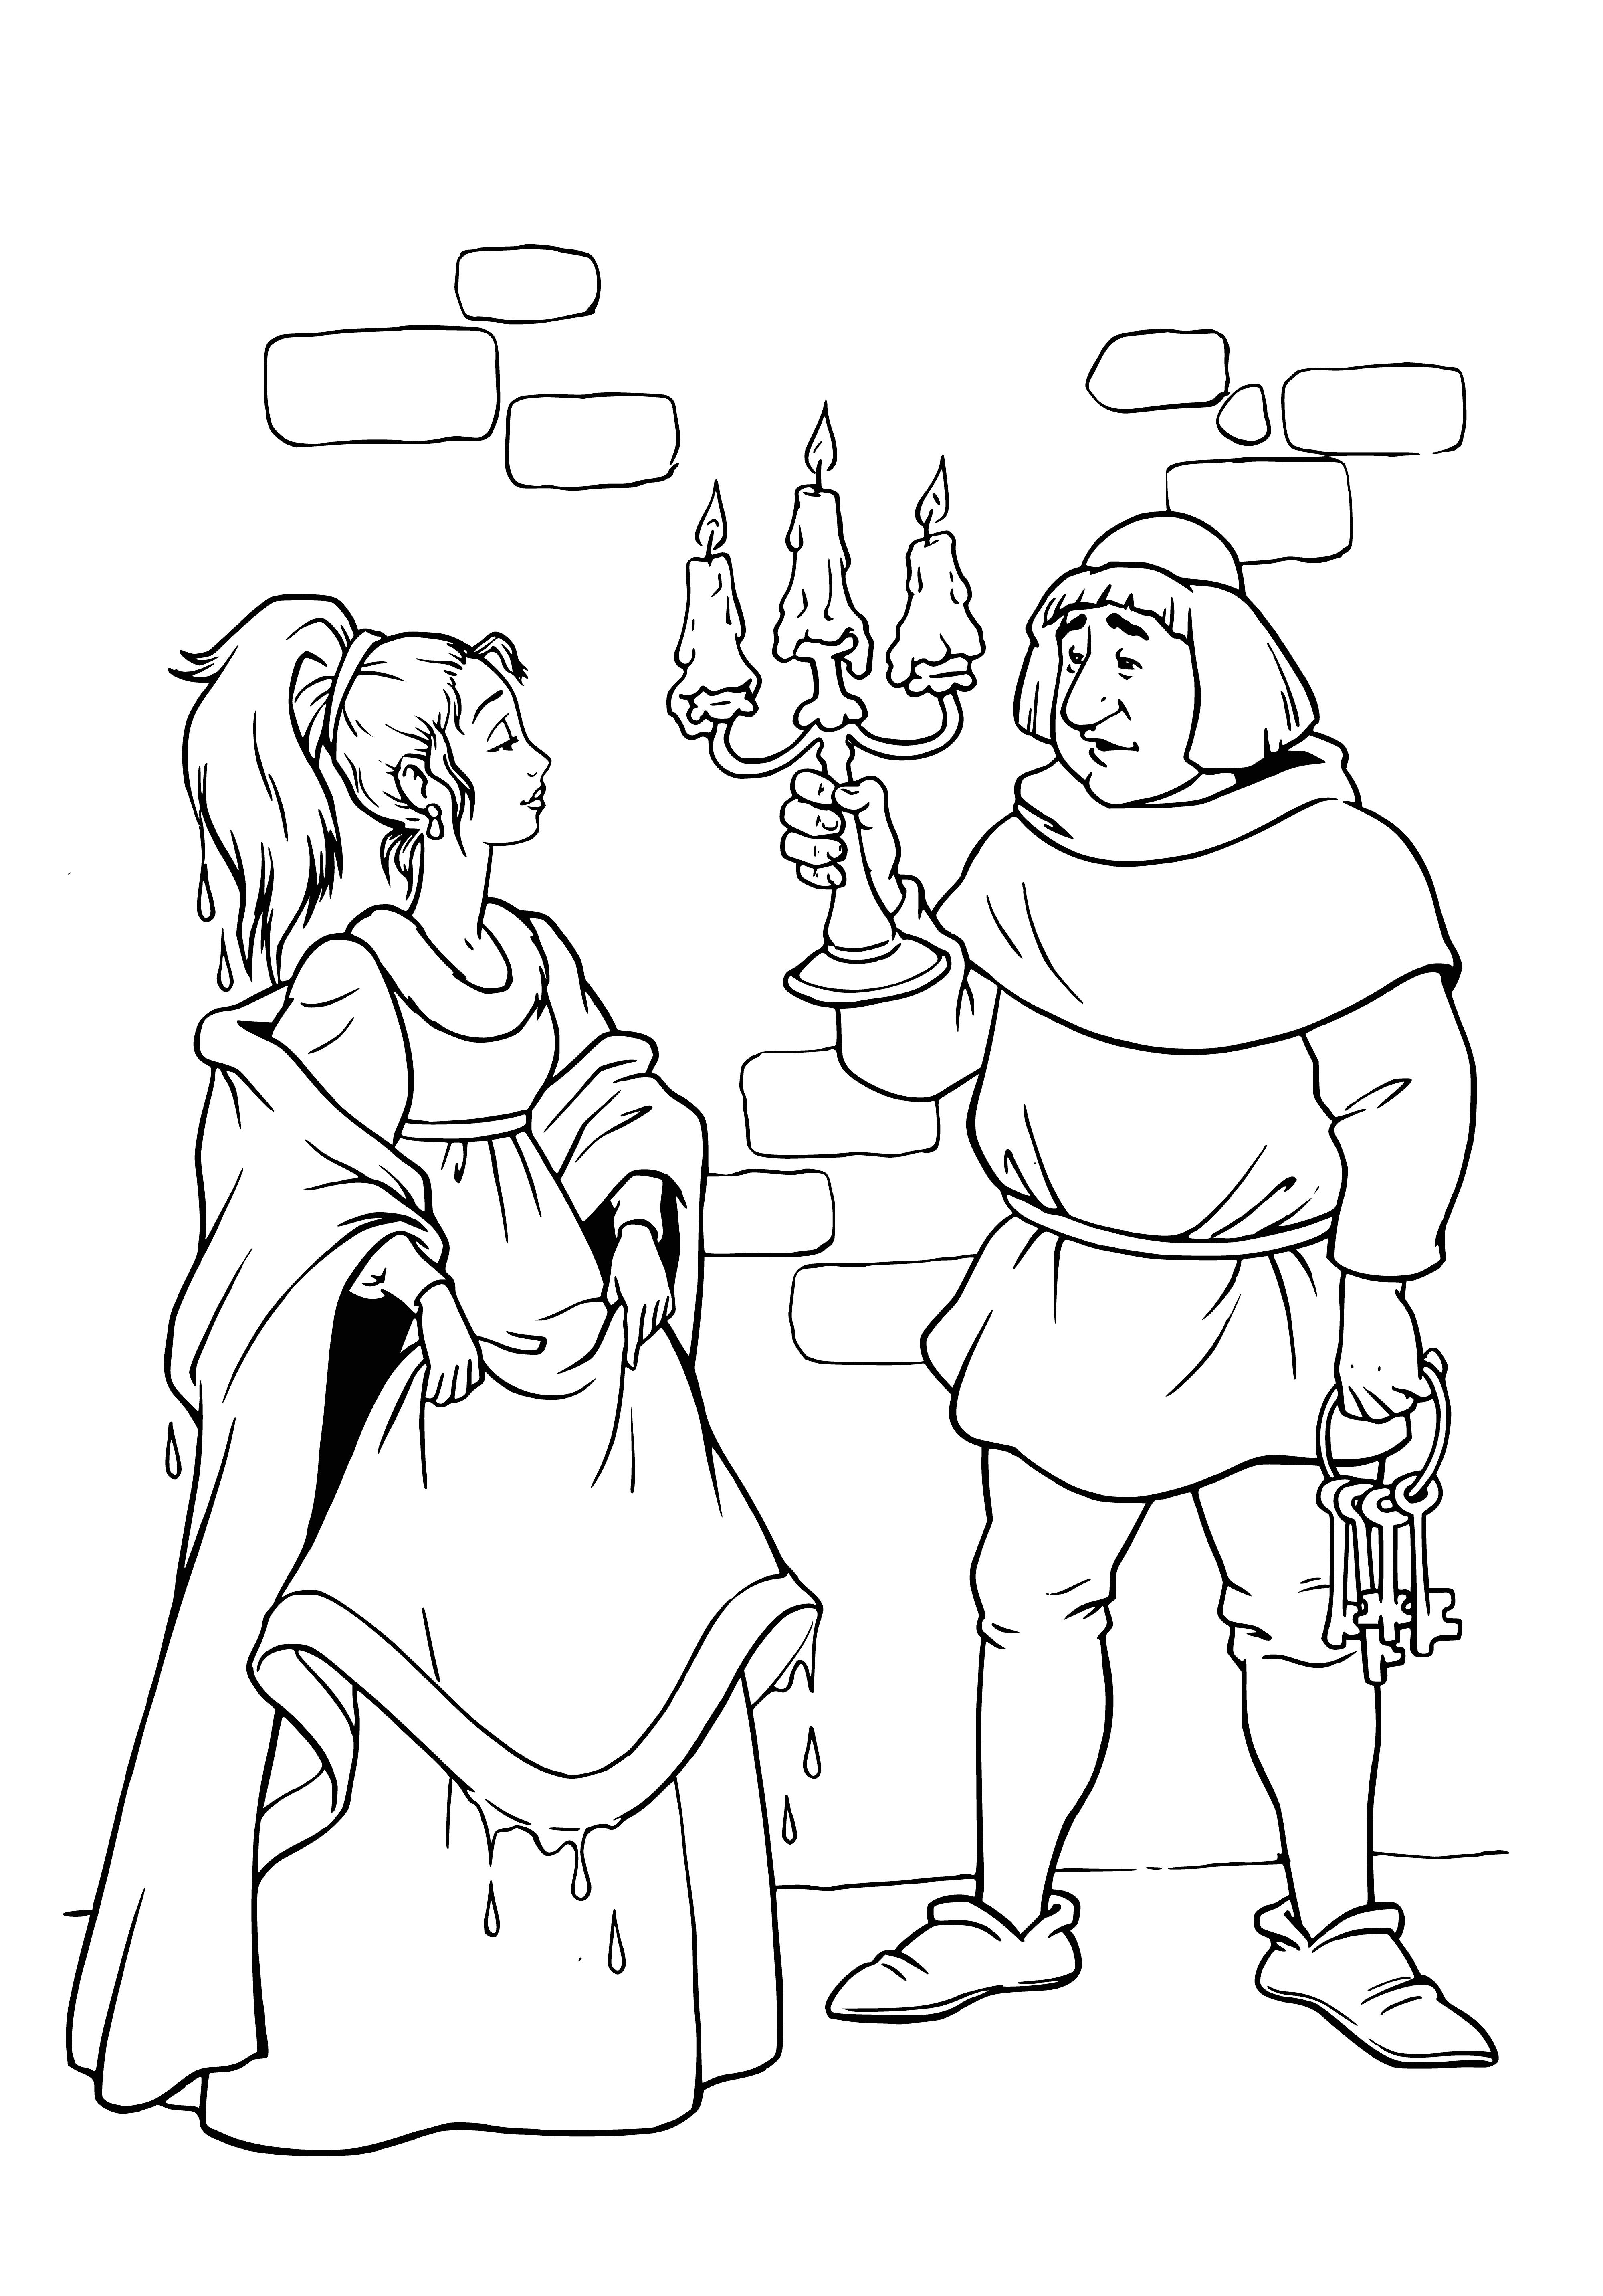 Princess in the palace coloring page